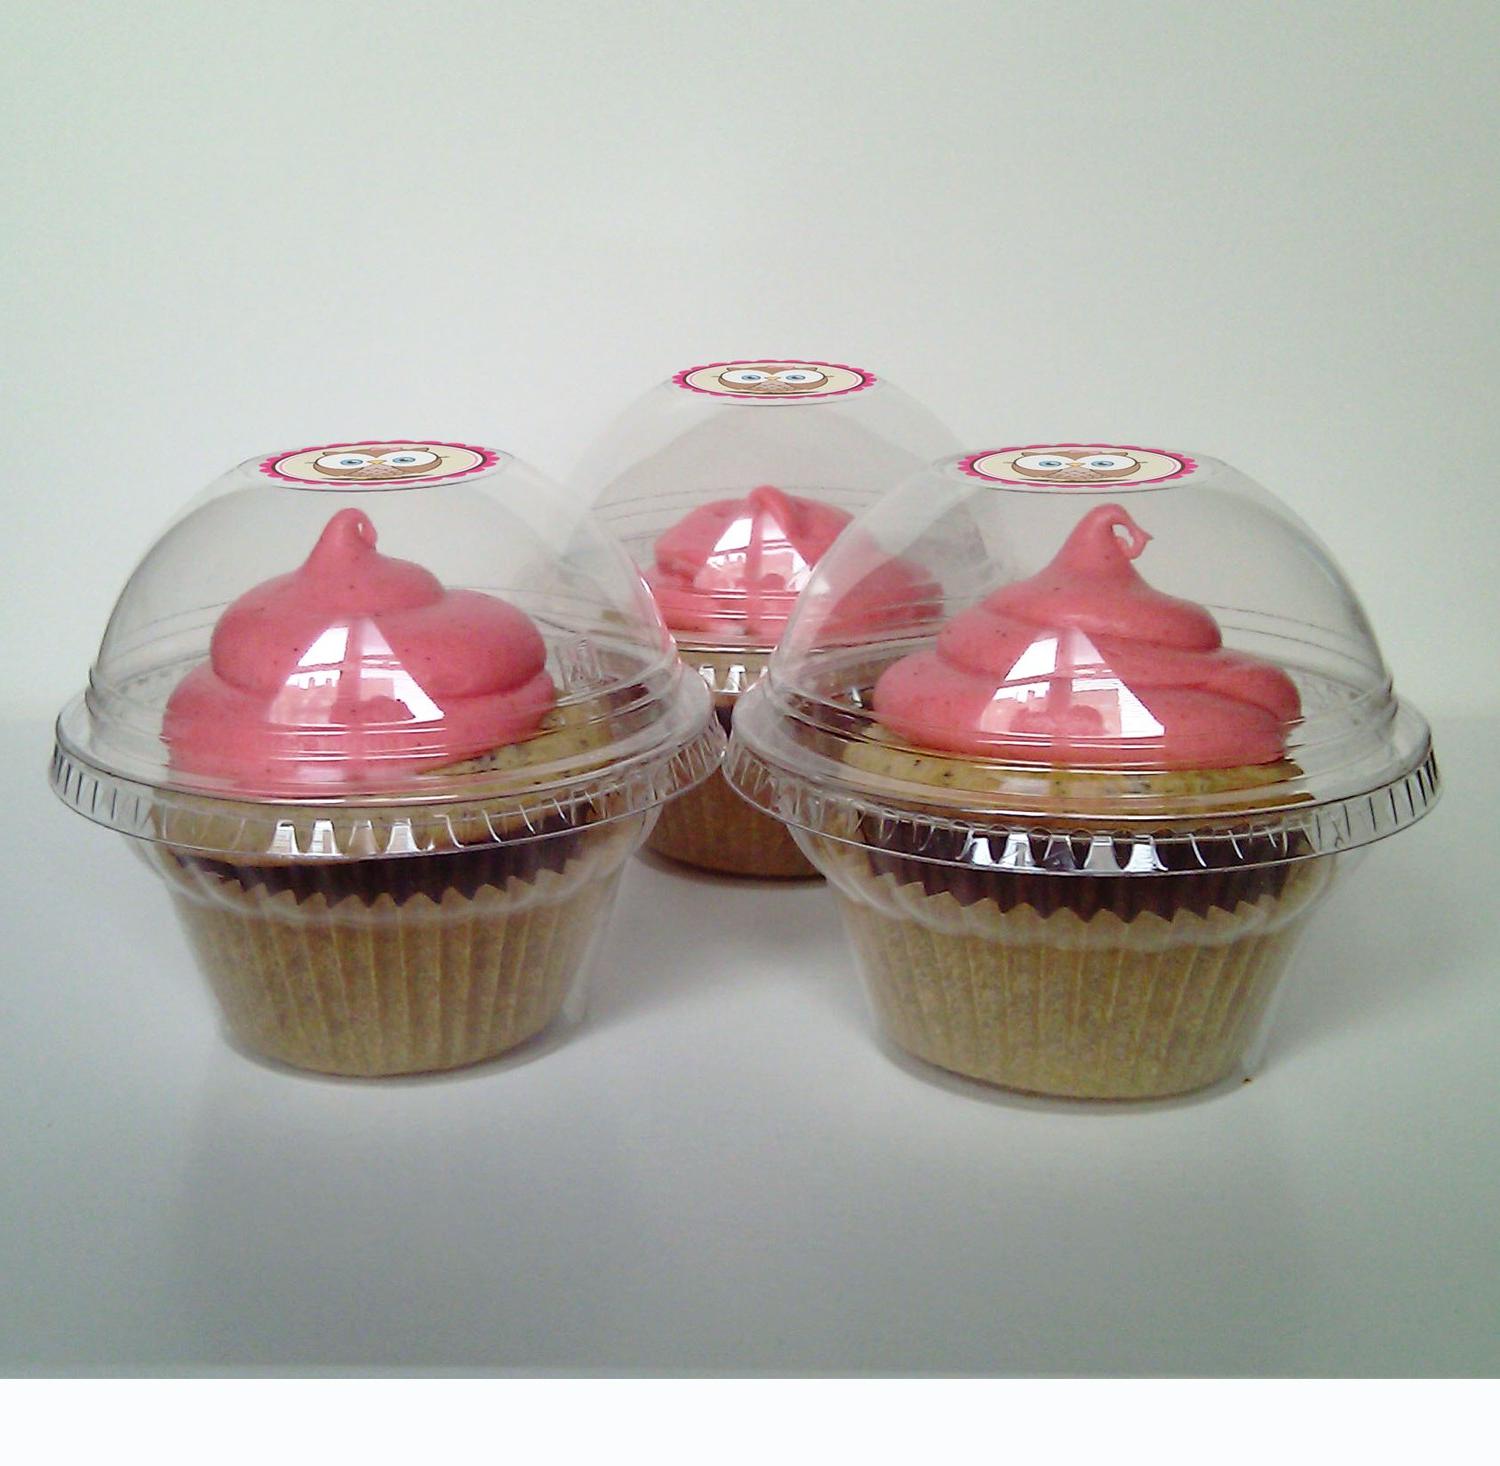 40 Clear Cupcake Favor Boxes